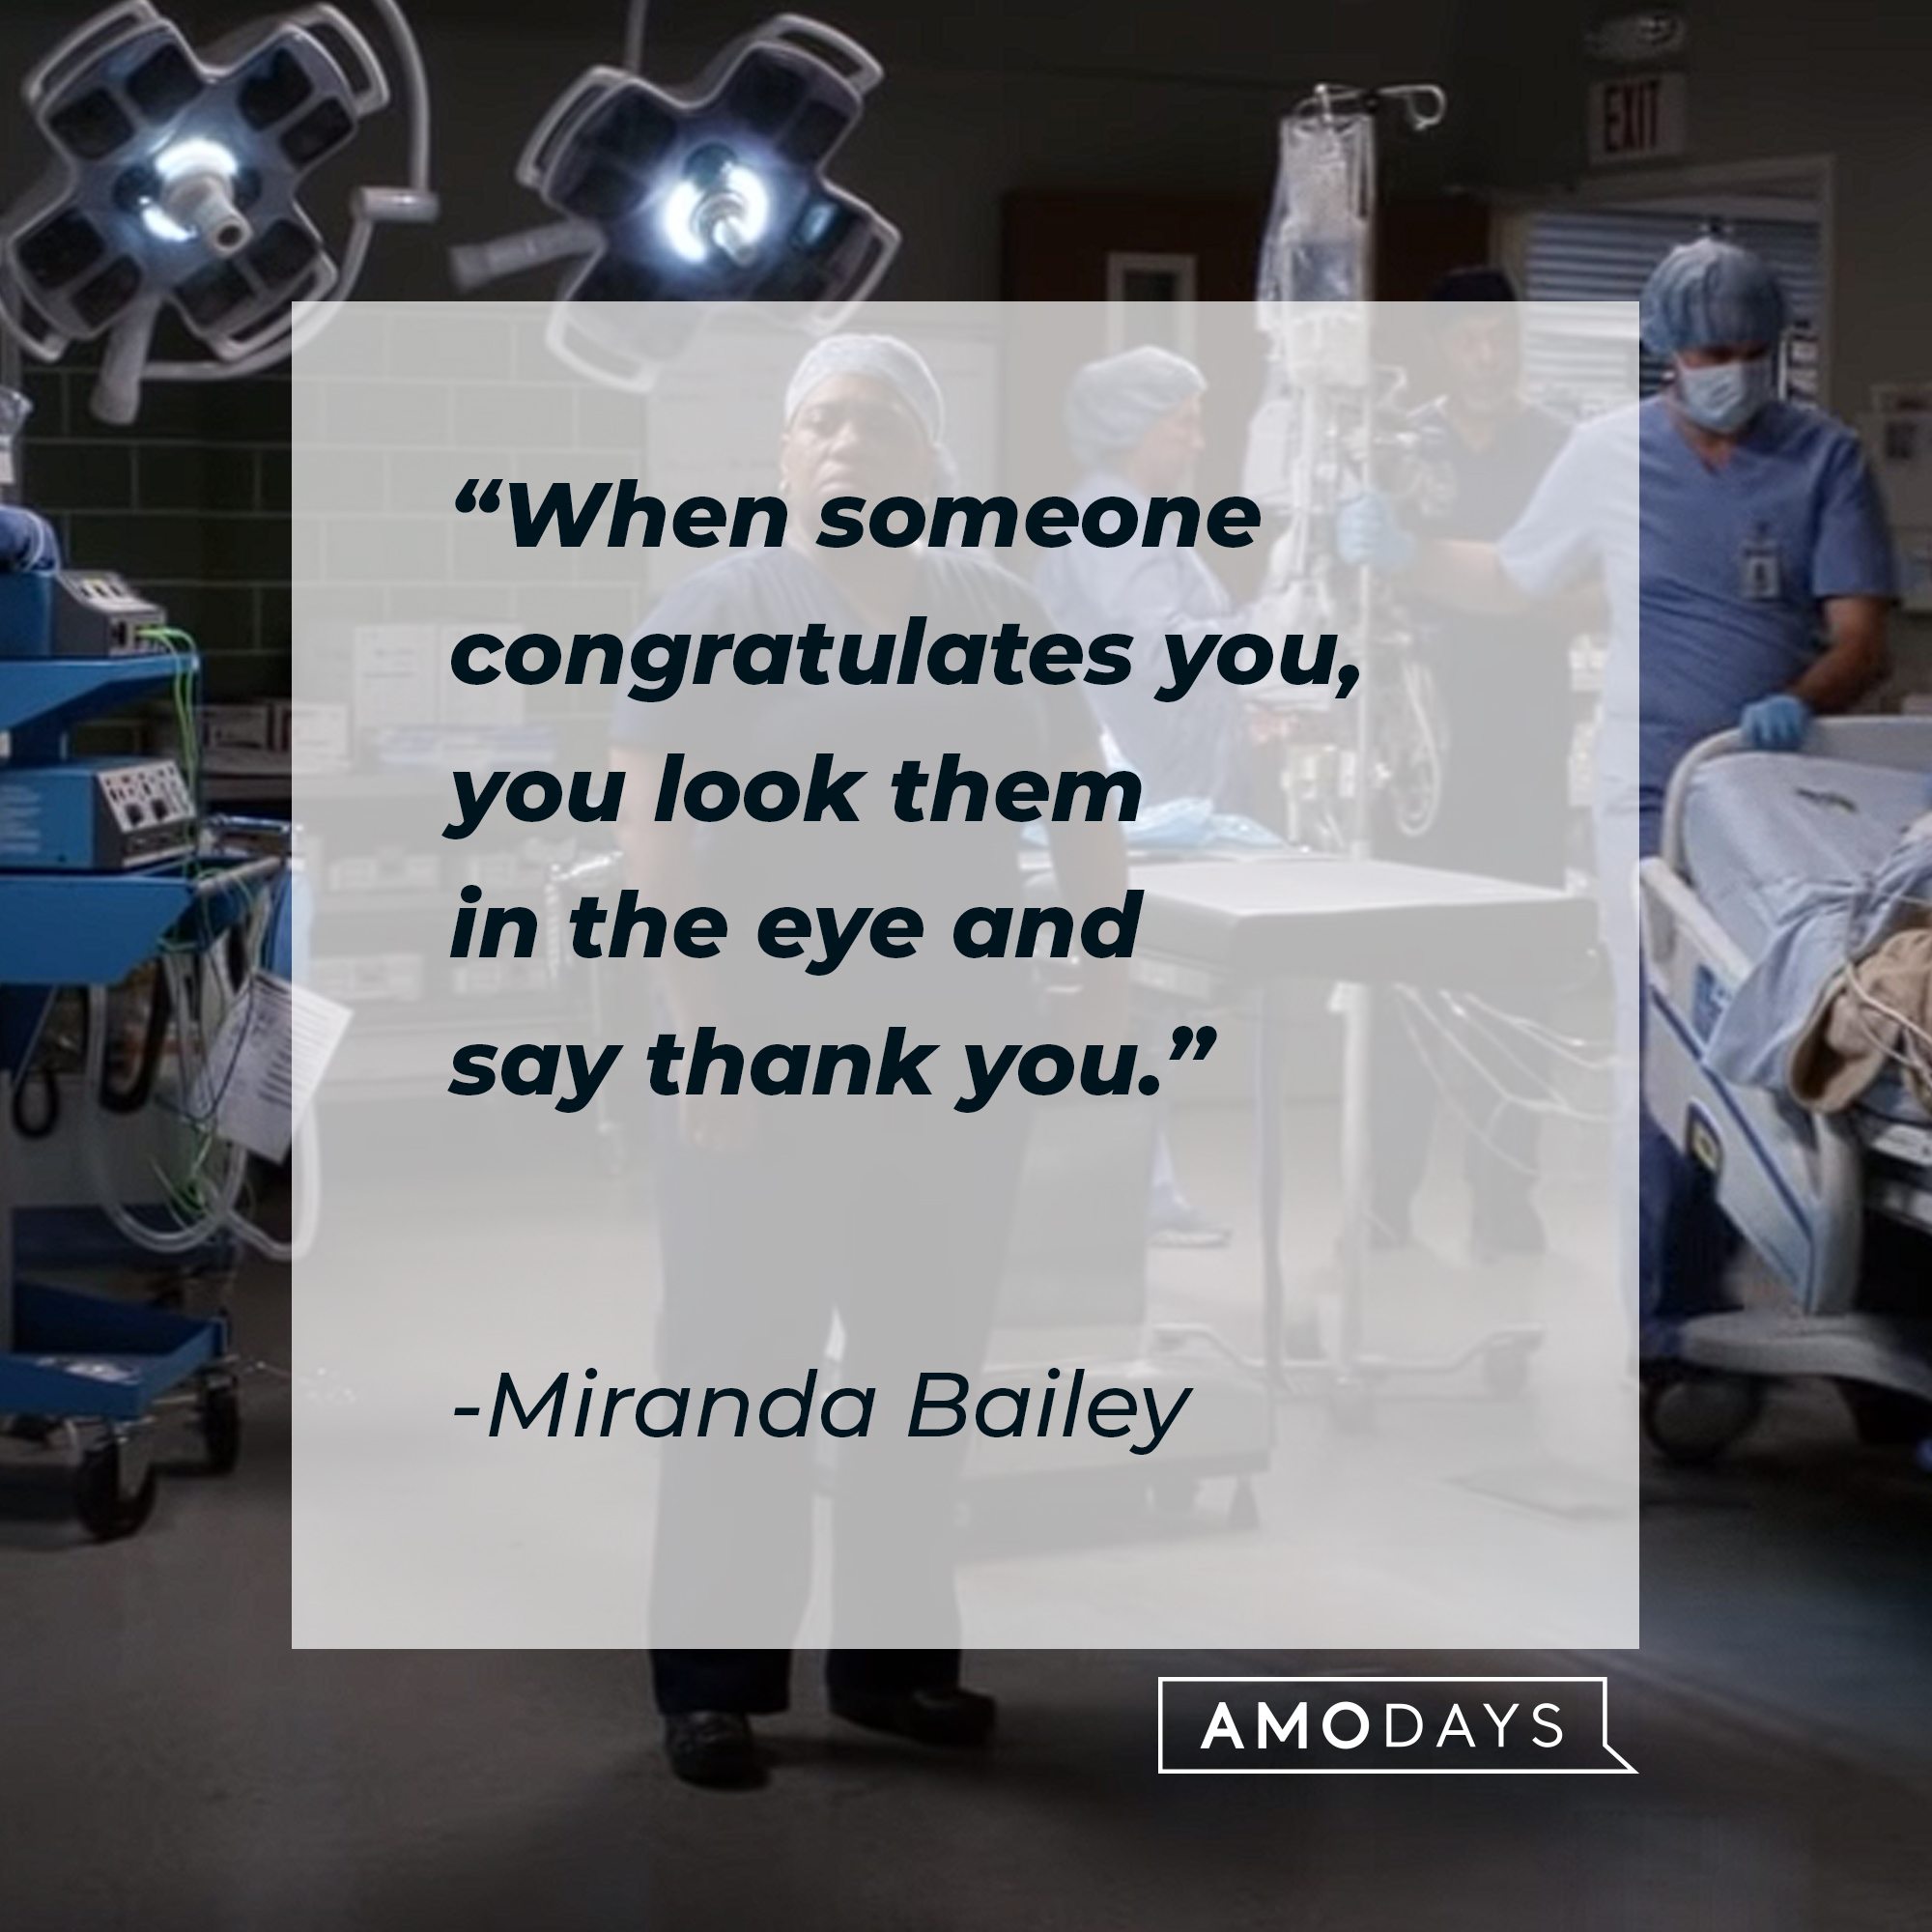 Miranda Bailey's quote: "When someone congratulates you, you look them in the eye and say thank you." | Source: youtube.com/ABCNetwork